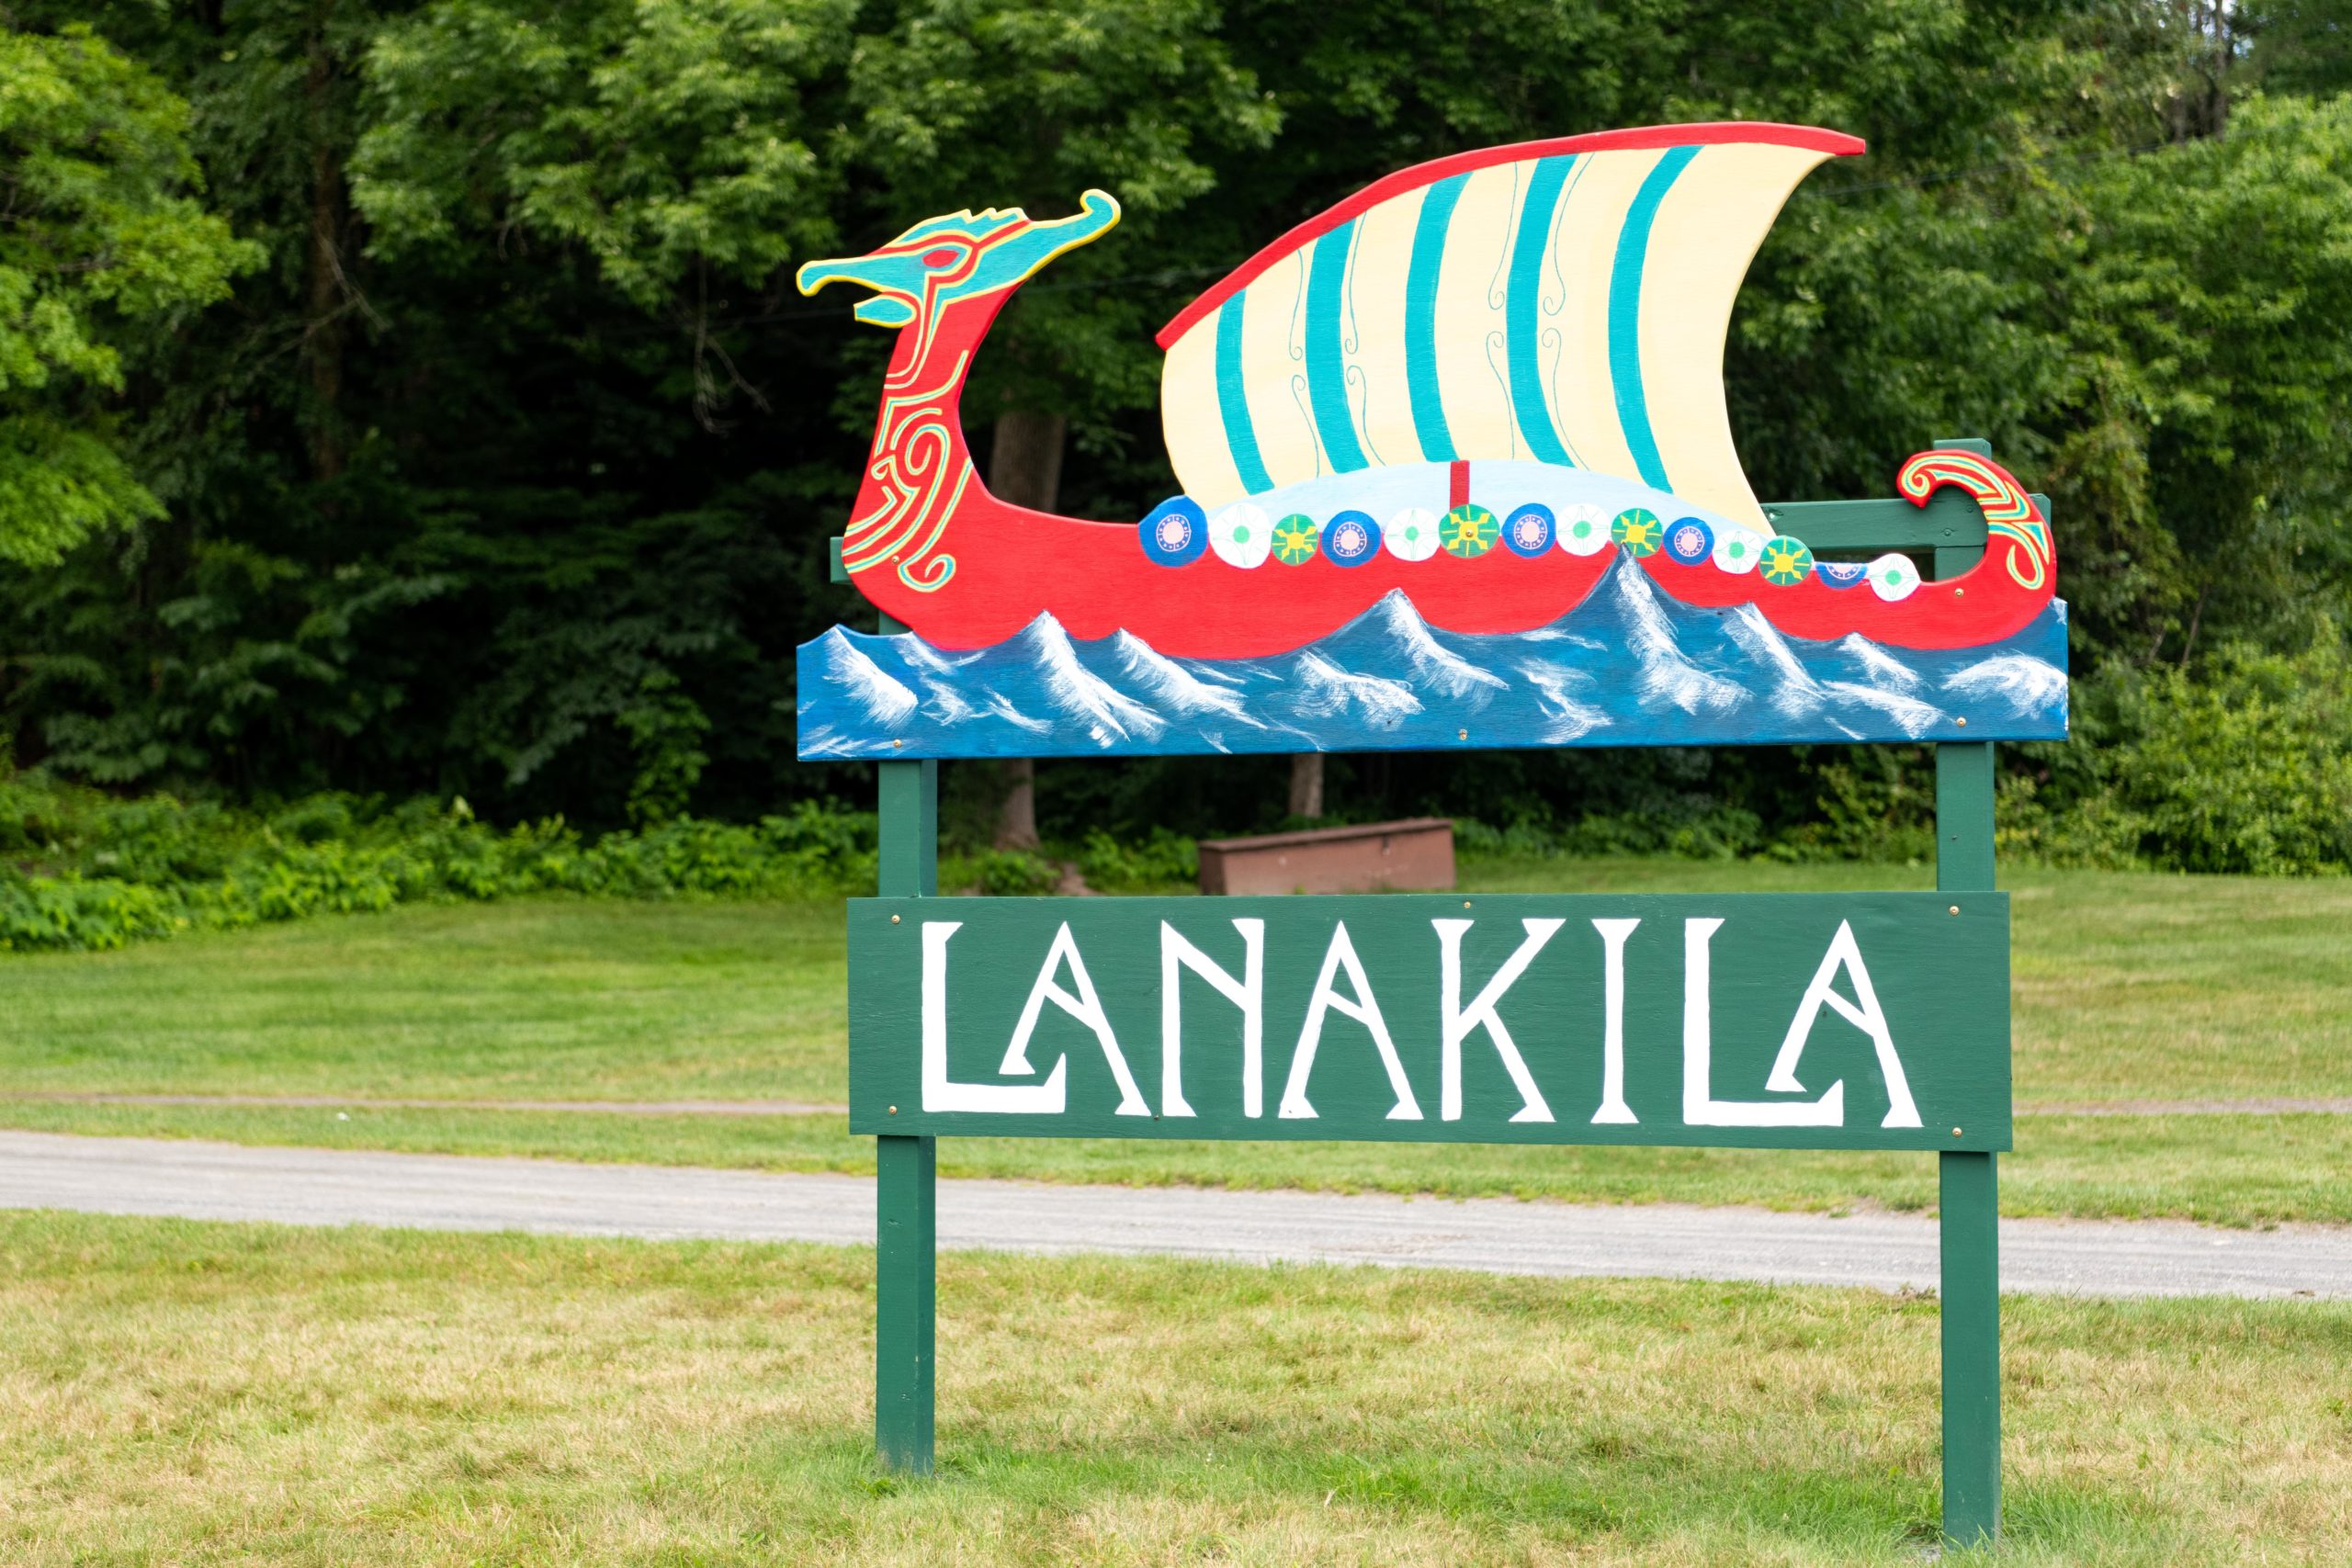 A sign that reads "Lanakila".